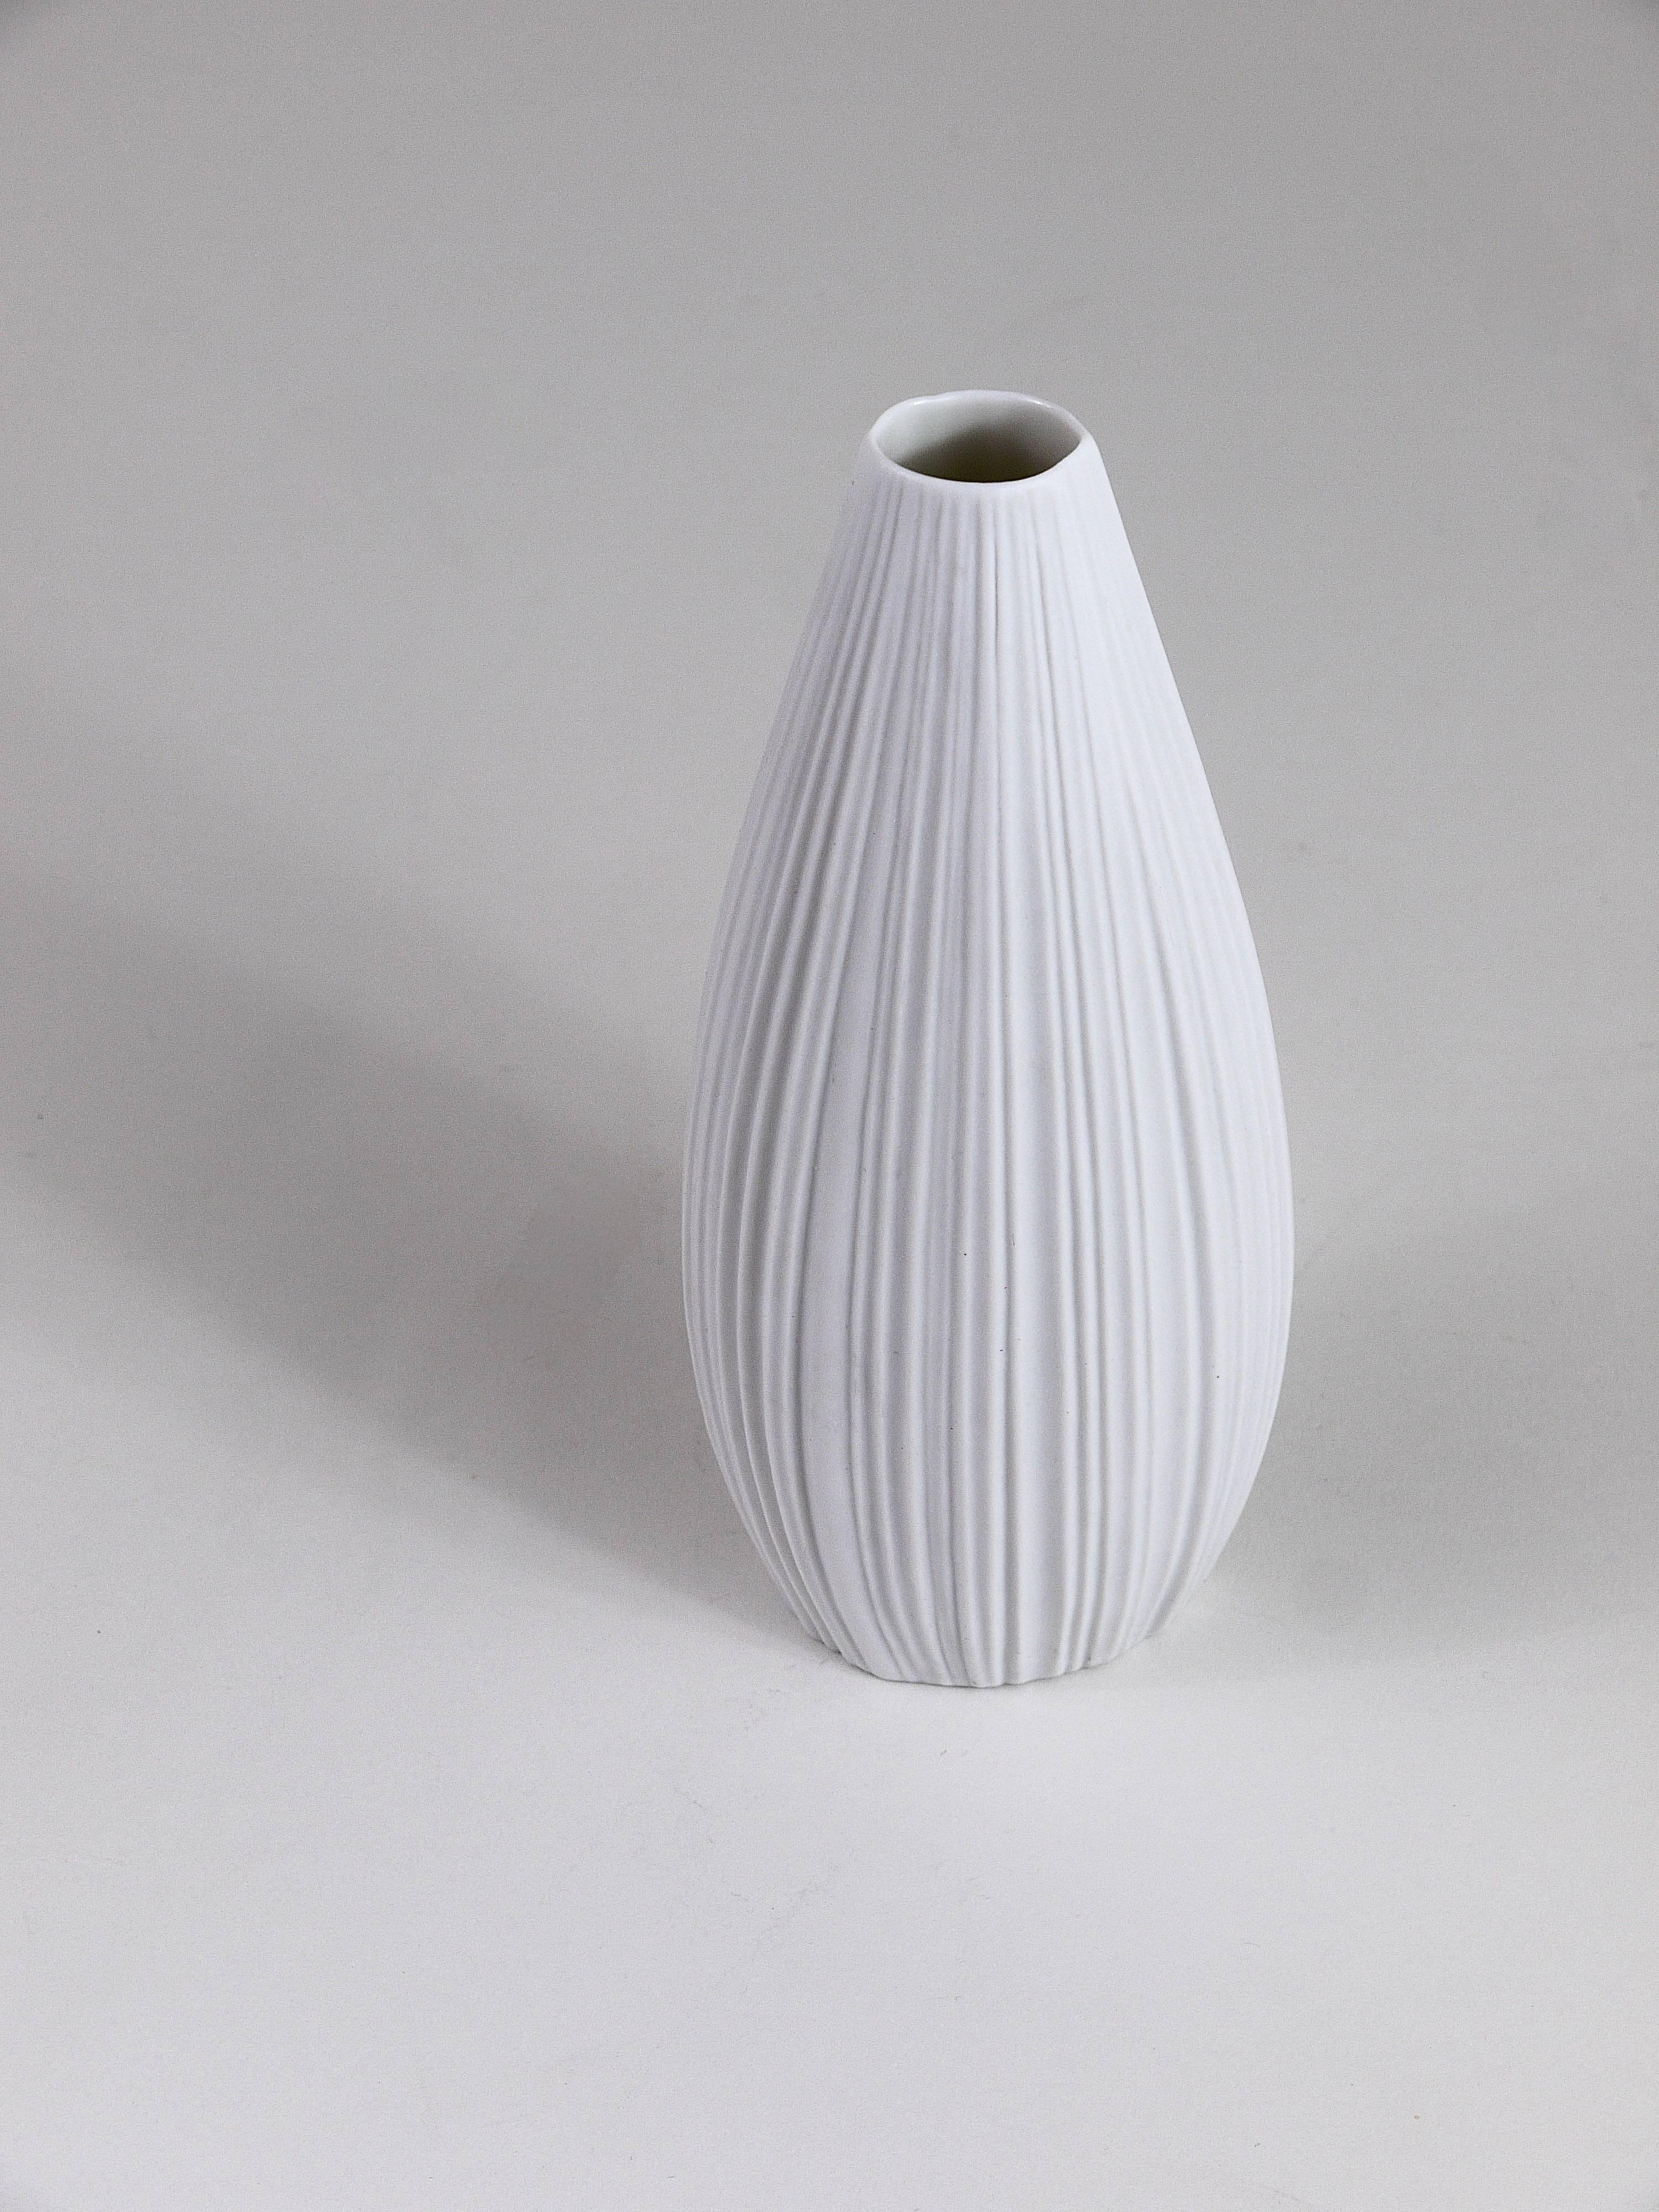 Rosenthal White Relief Striped Porcelain Vase by Martin Freyer, Germany, 1960s For Sale 4